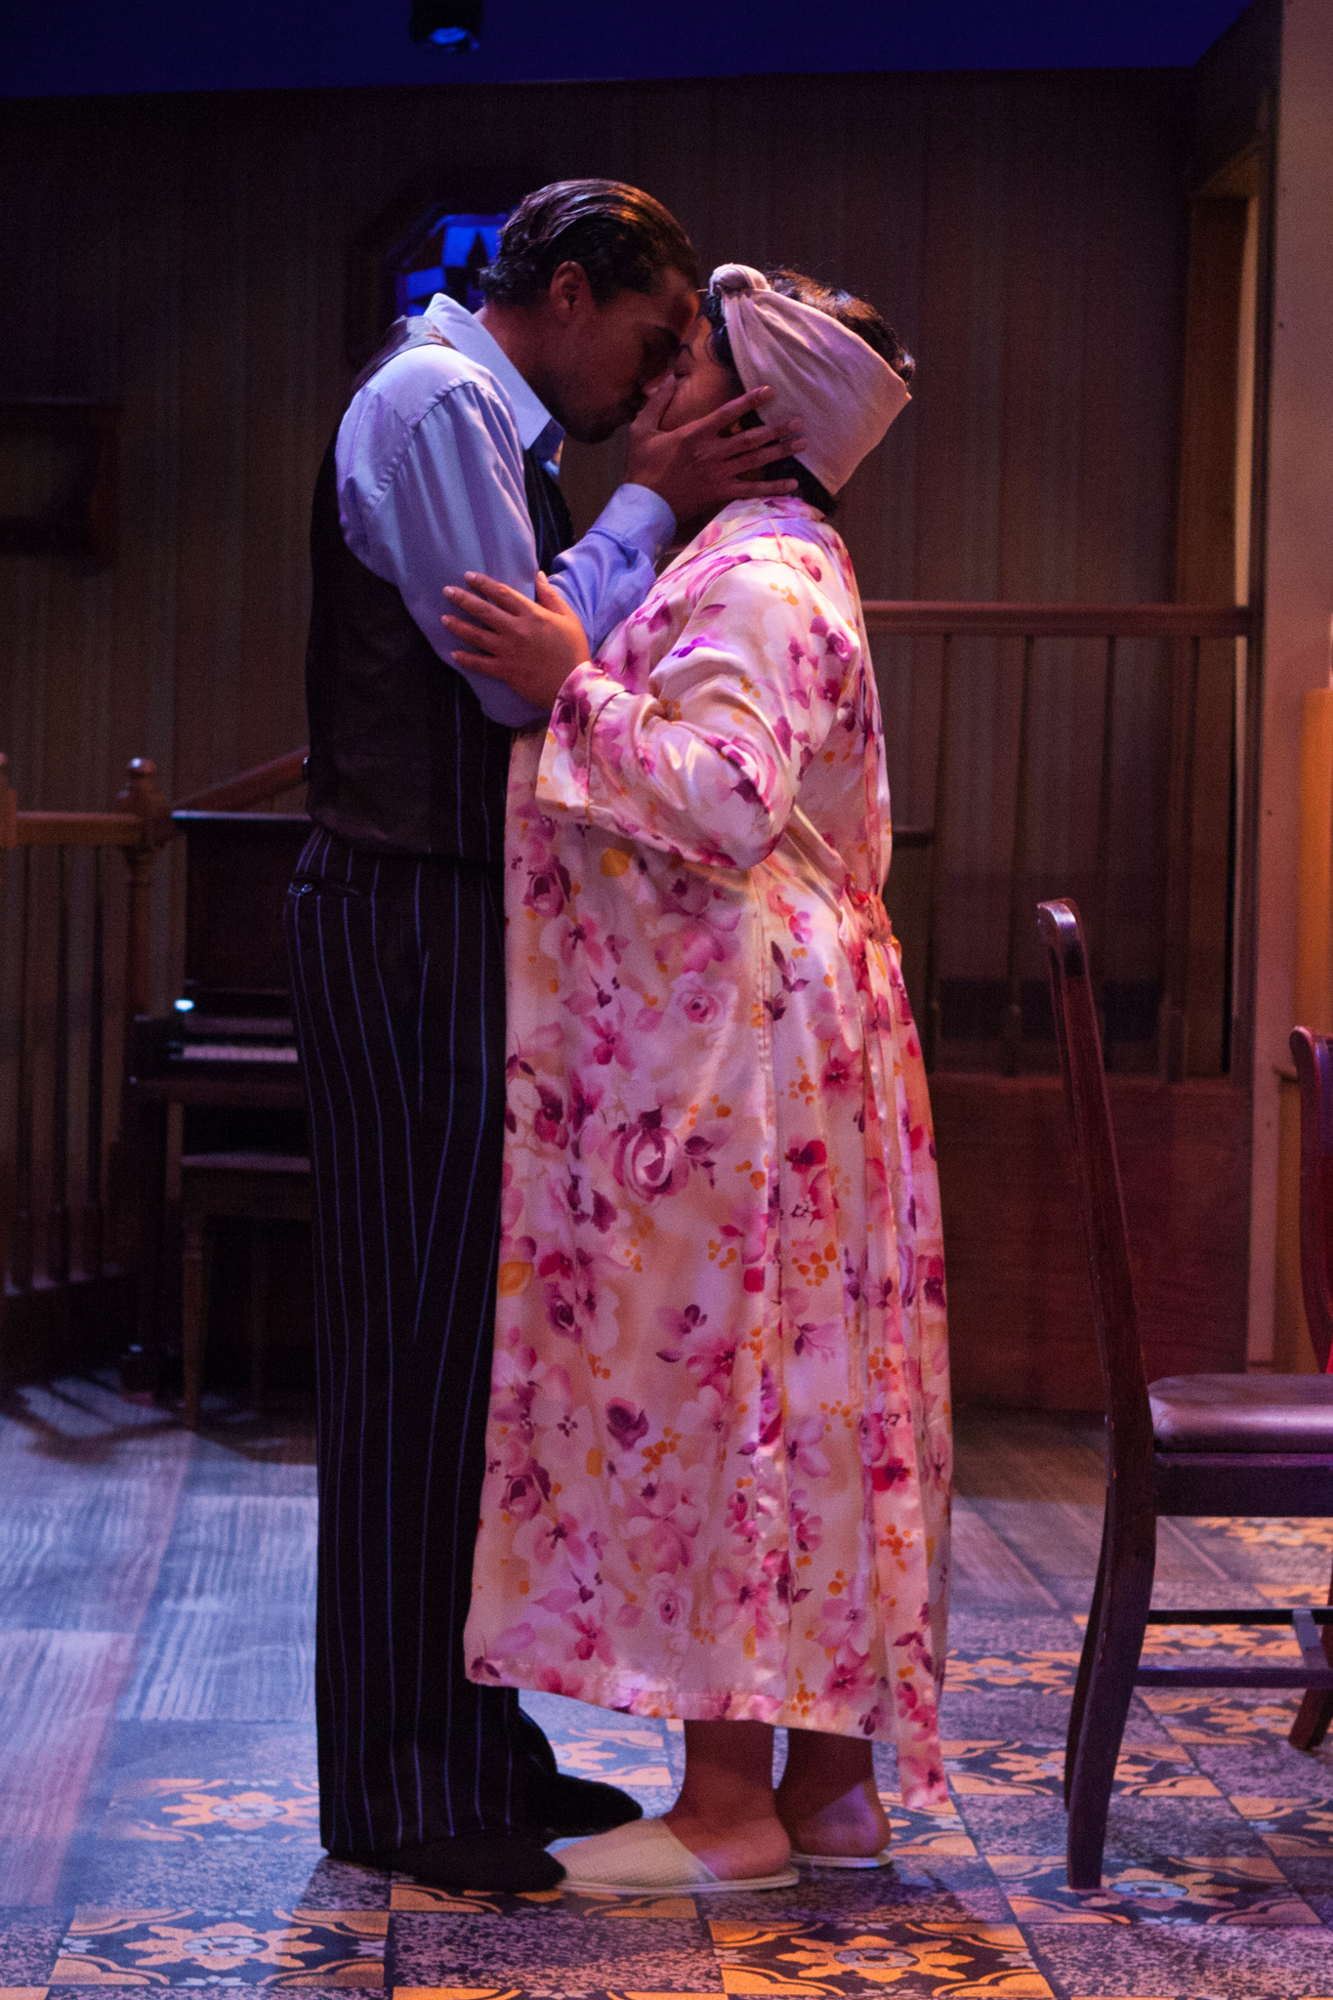 Berniece (Noelle Strong) and Lymon (Michael Mendez). Photo by Don Daly